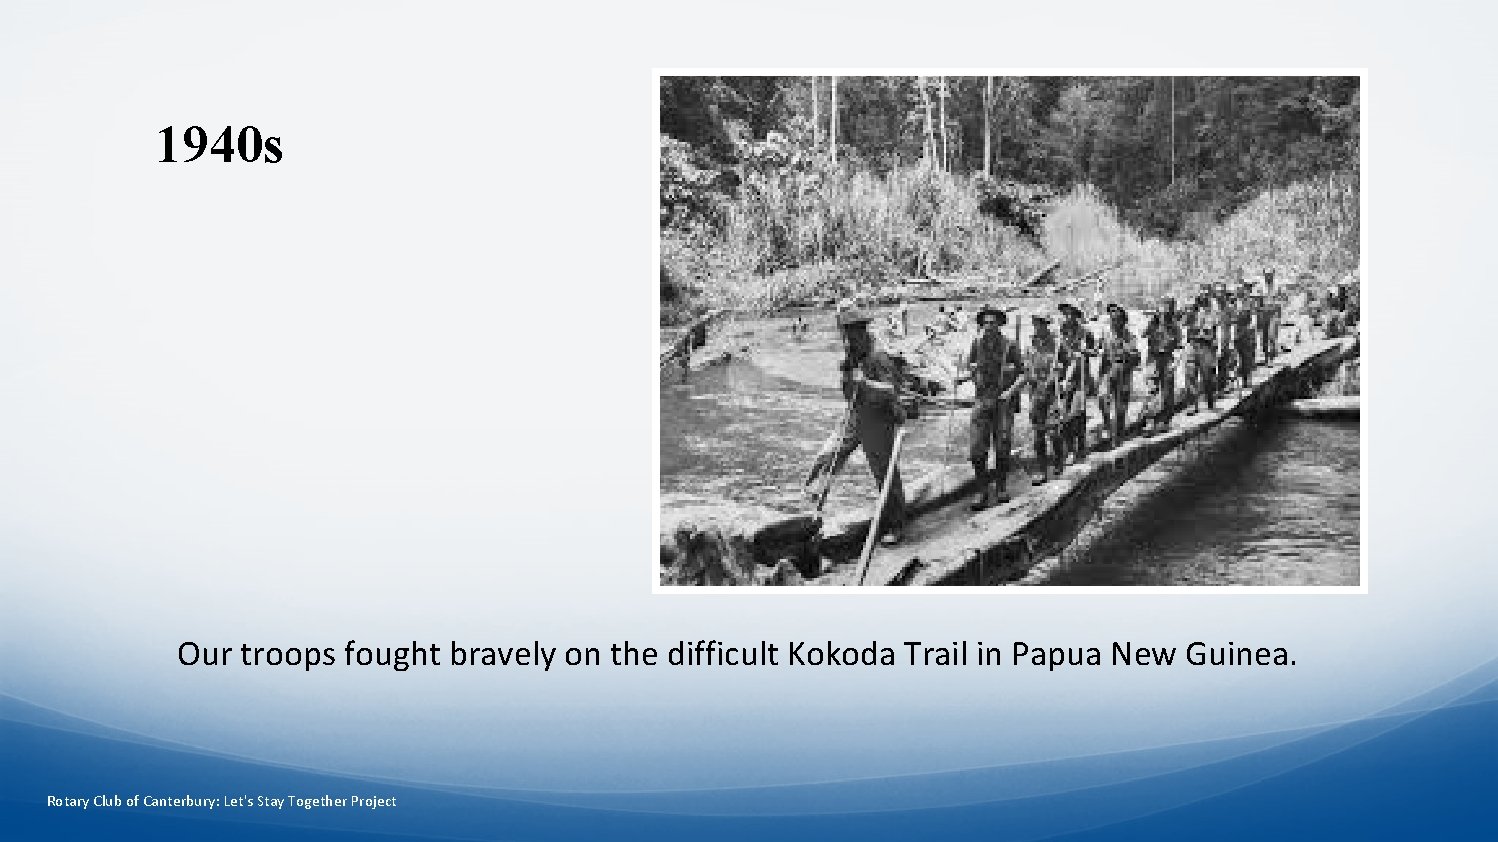 1940 s Our troops fought bravely on the difficult Kokoda Trail in Papua New